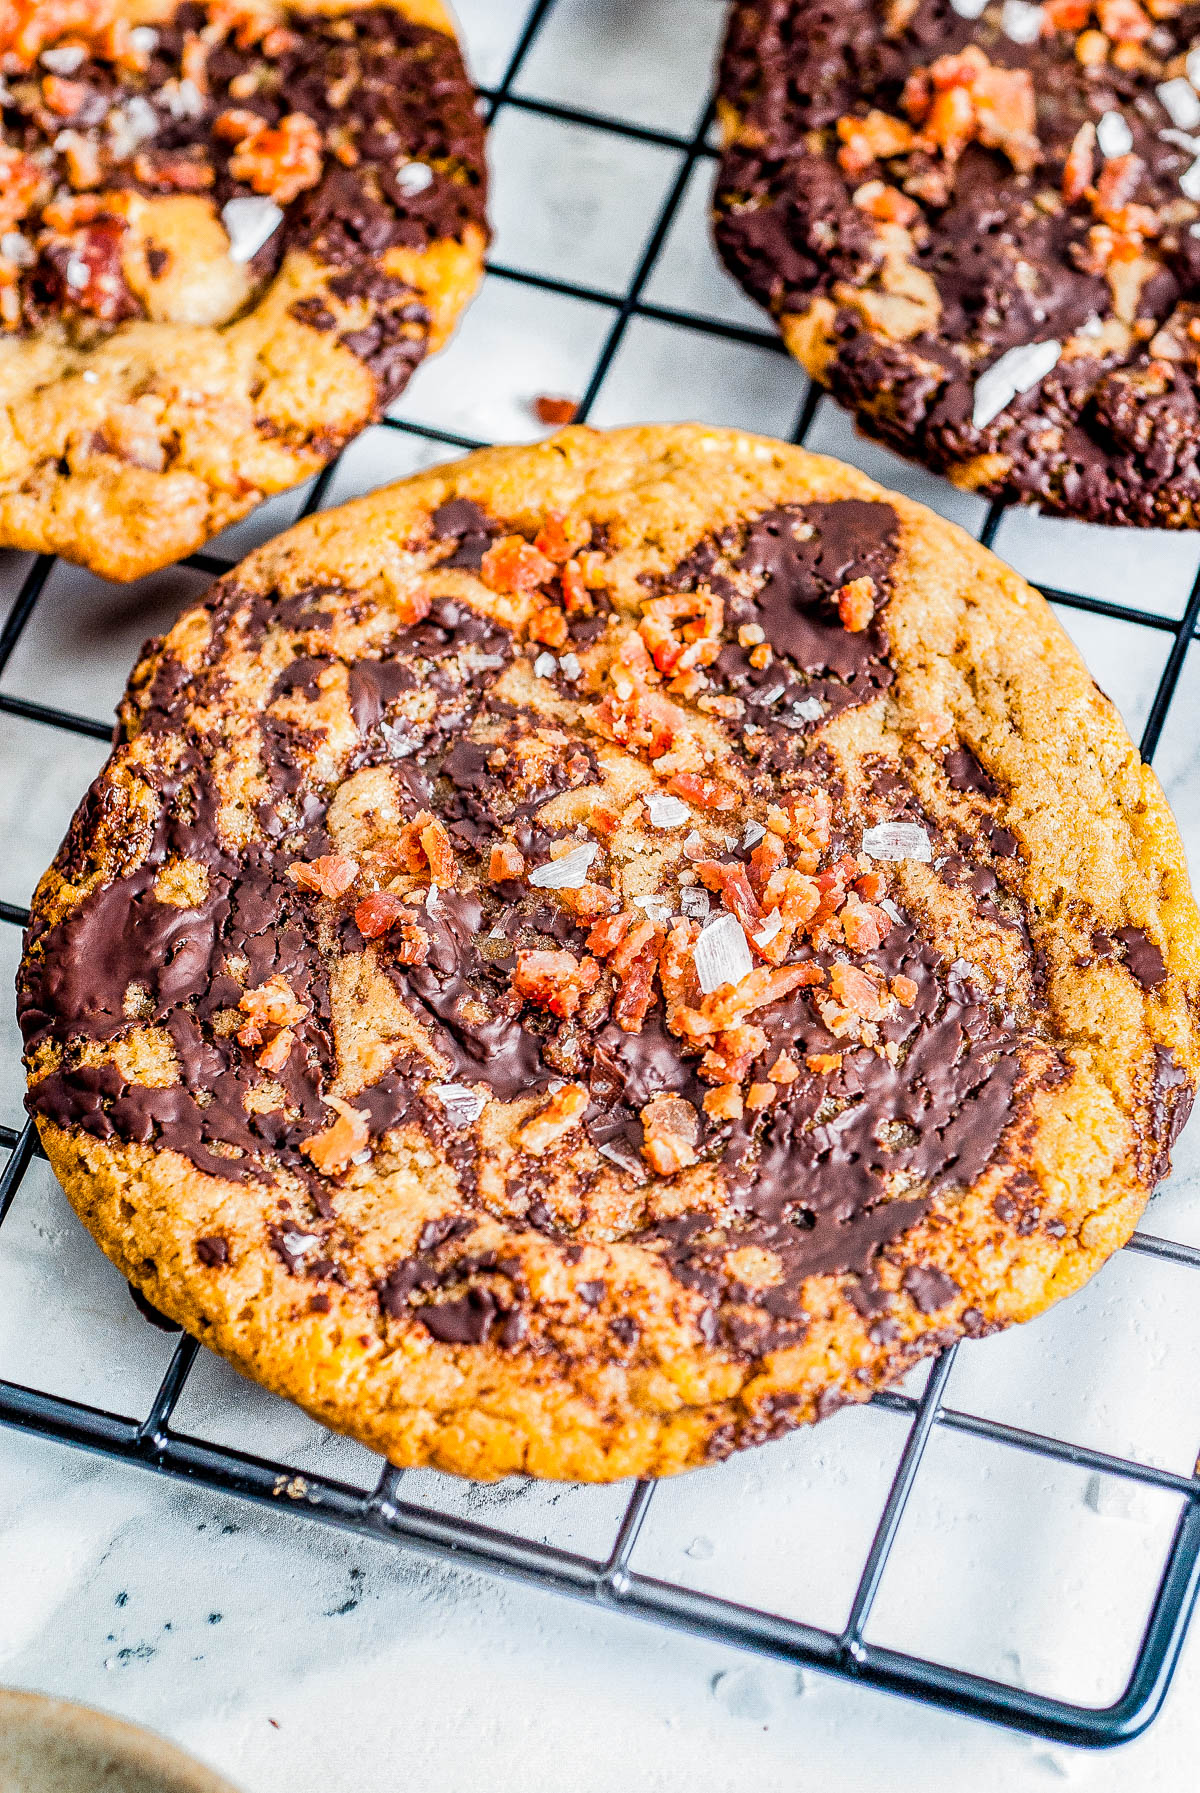 Bacon Chocolate Chip Cookies - These decadent and indulgent chocolate chip cookies are the perfect balance of savory, salty and sweet in every delectable chewy bite! With crispy bacon, butterscotch chips, tons of melted chocolate, and flaky sea salt, they're a flavor explosion for those bold enough to give them a try!